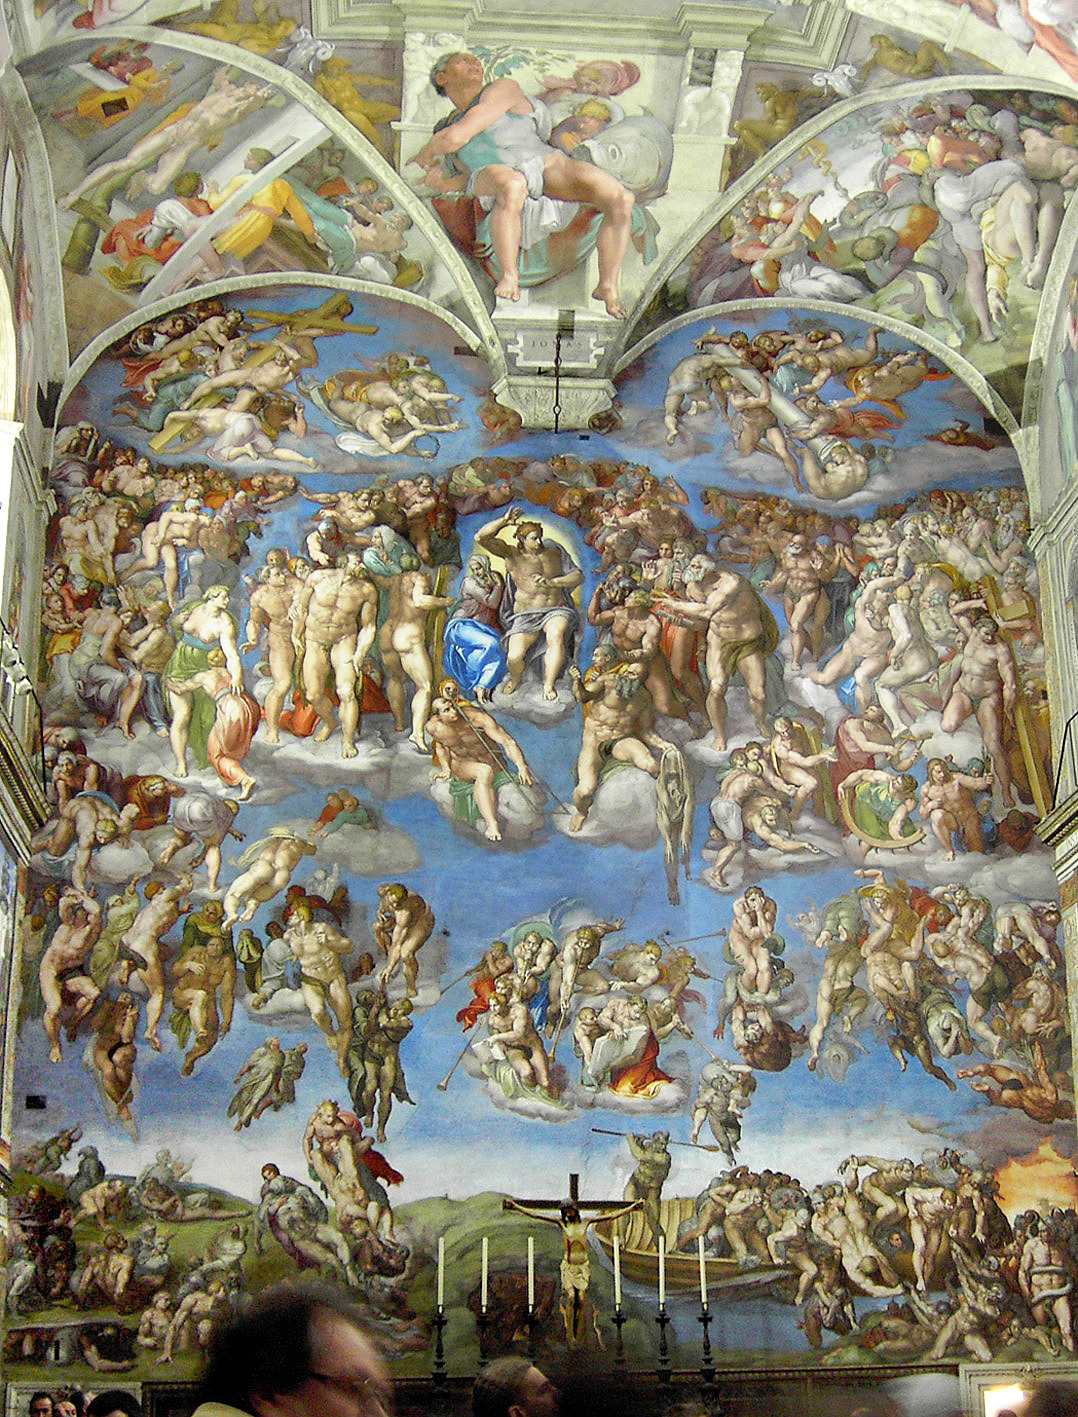 Michelangelo's The Last Judgment, Southern Wall, Sistine Chapel, Rome, Italy